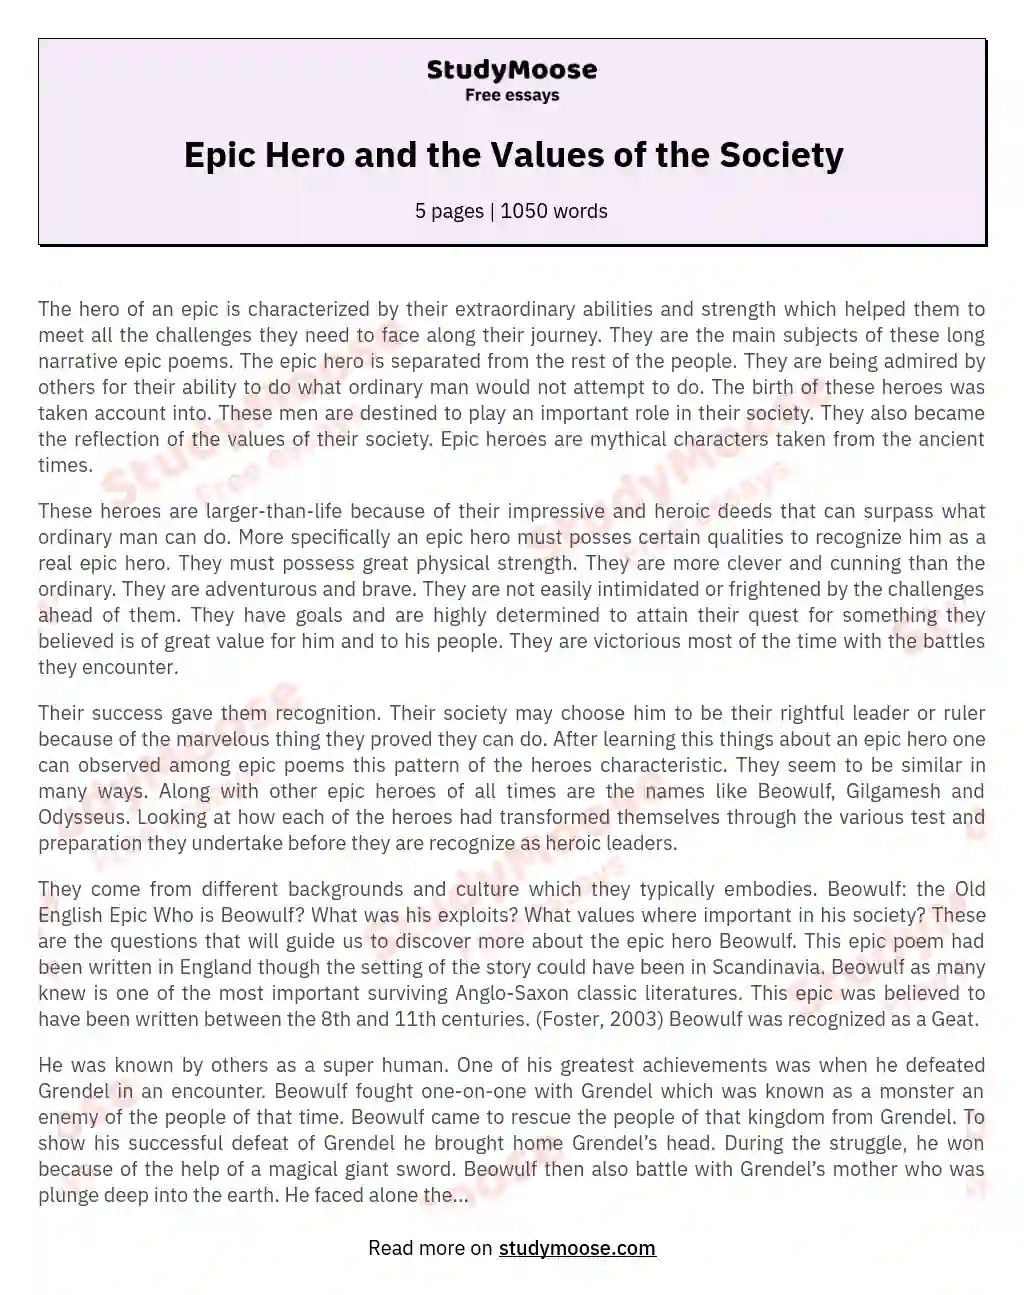 Epic Hero and the Values of the Society essay